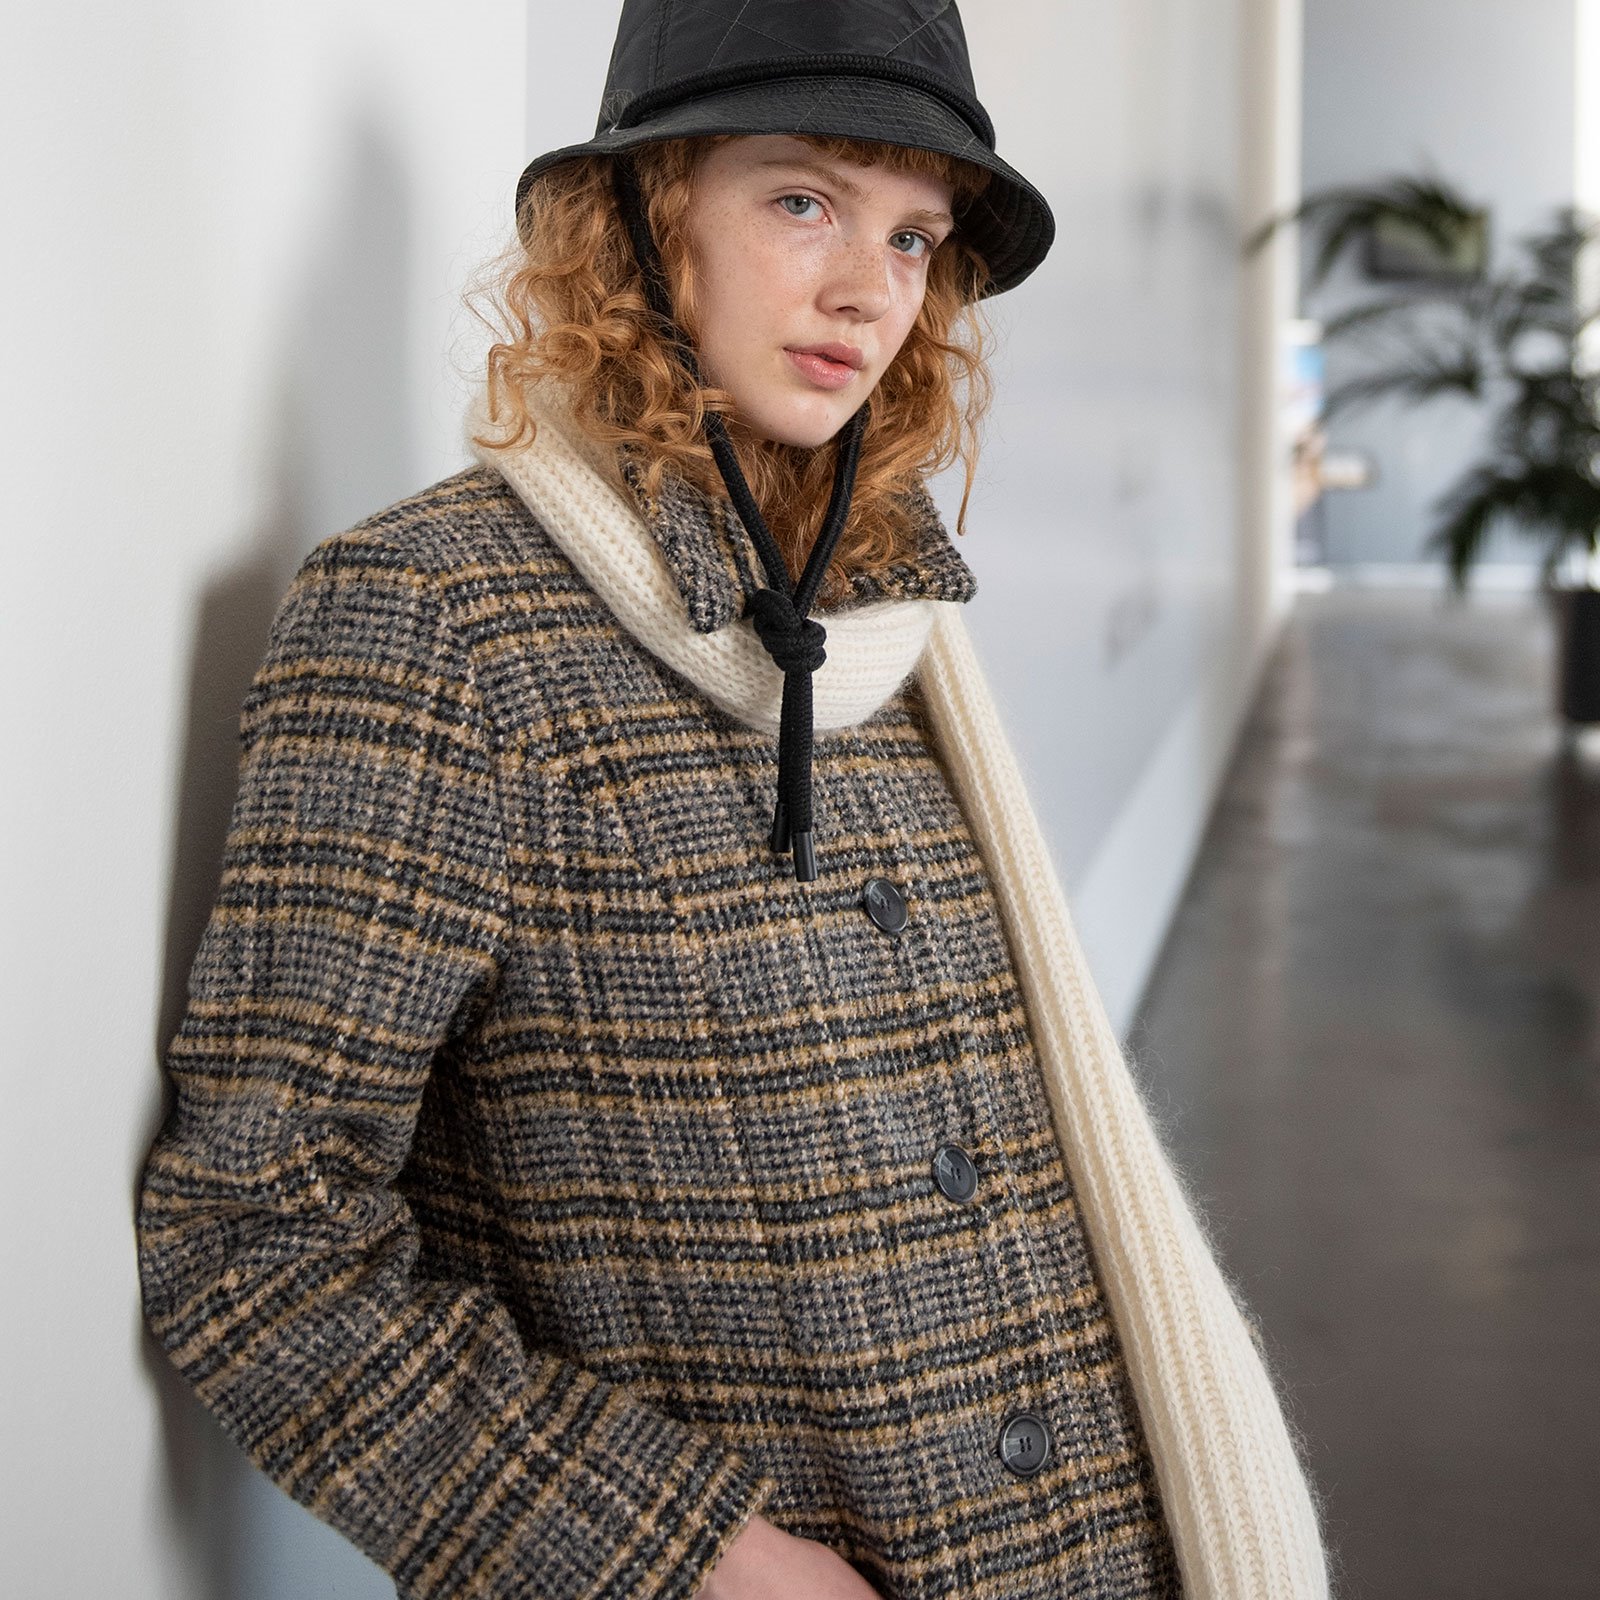 Winter coat - keep warm in cold weather PURIST029.jpg